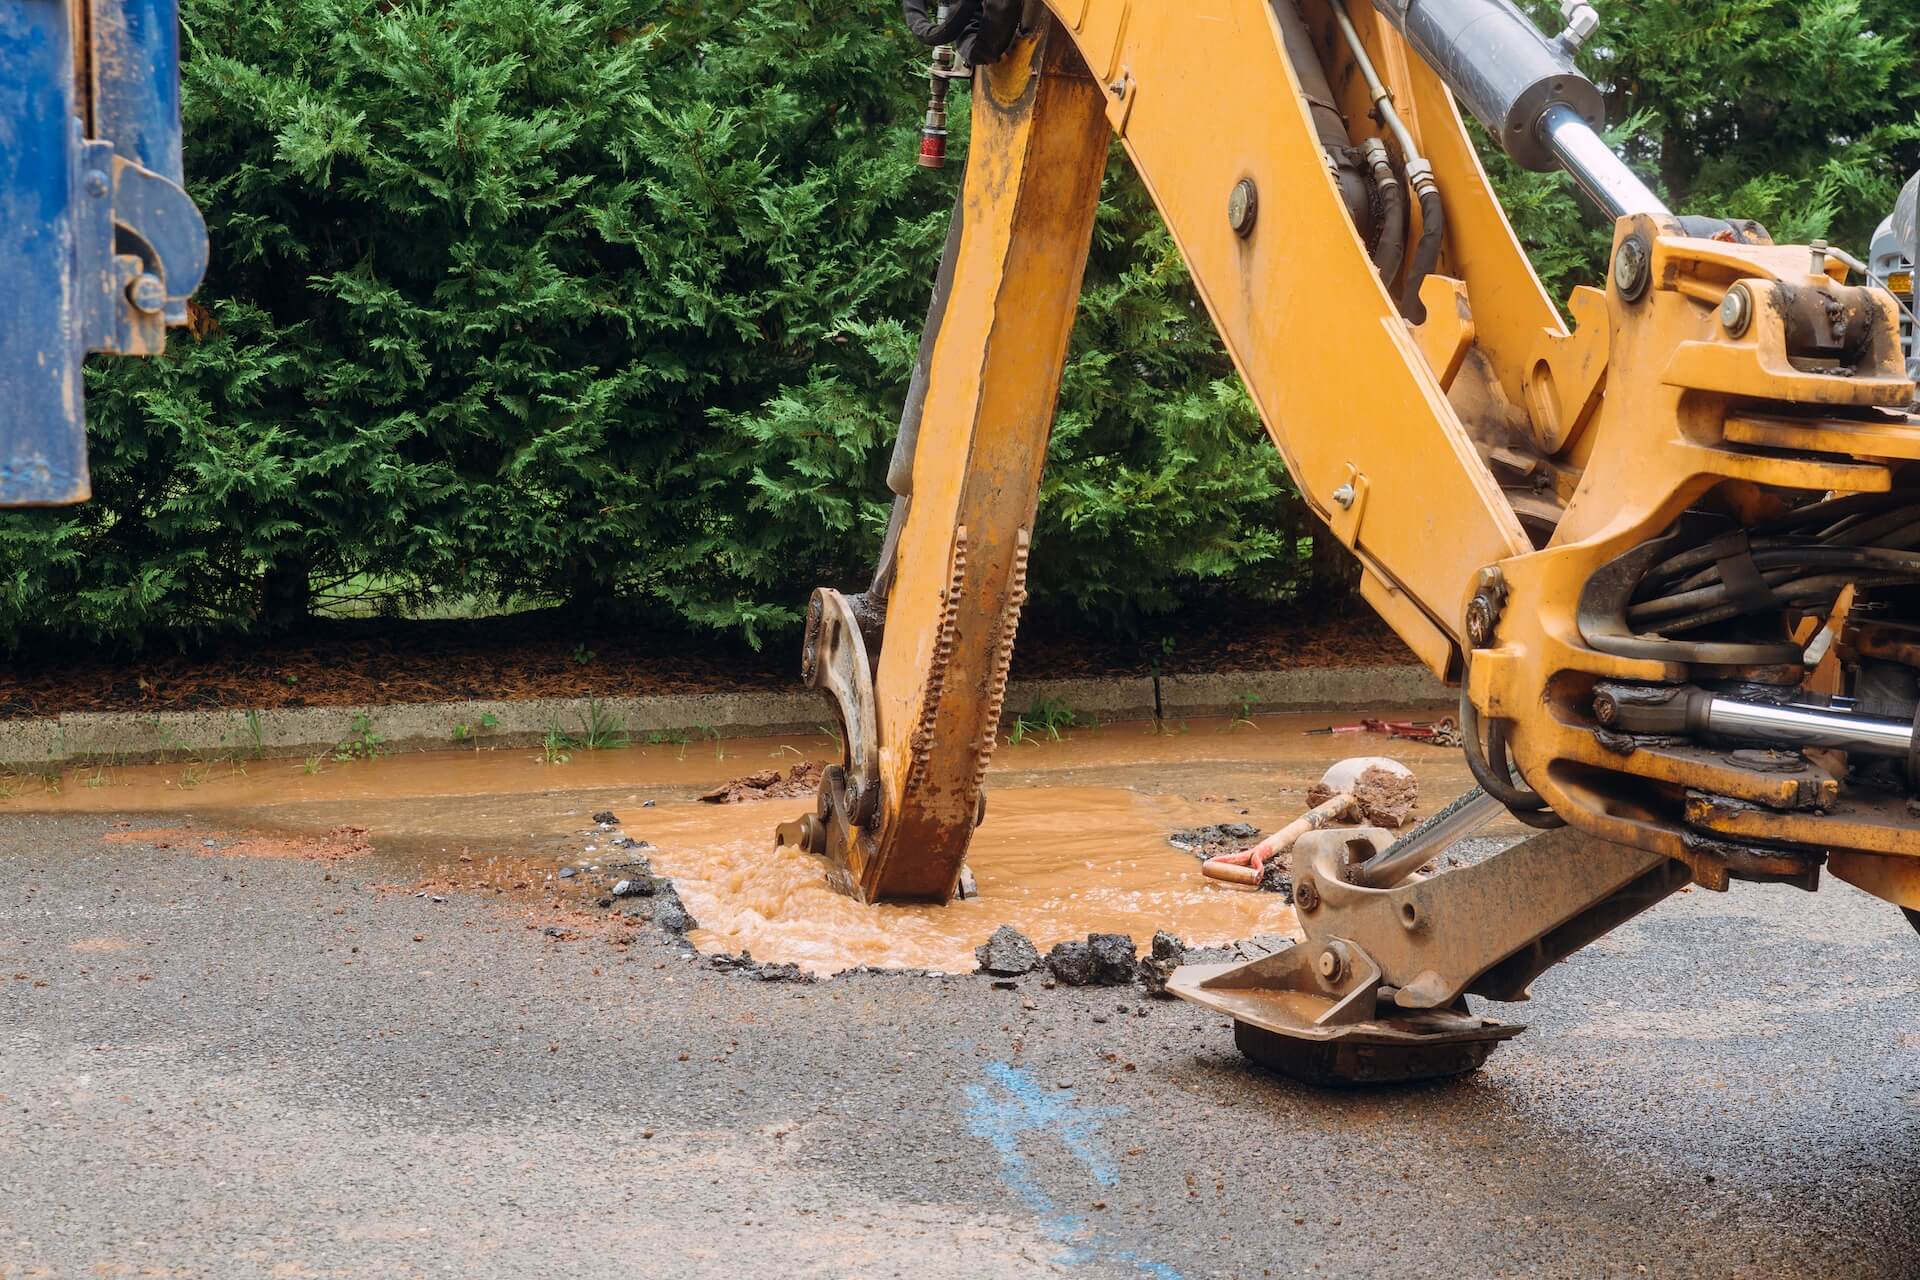 Burst pipes in a city being fixed with a backhoe | Featured image for the Plumbing Repair Services Page from Akins Plumbing.